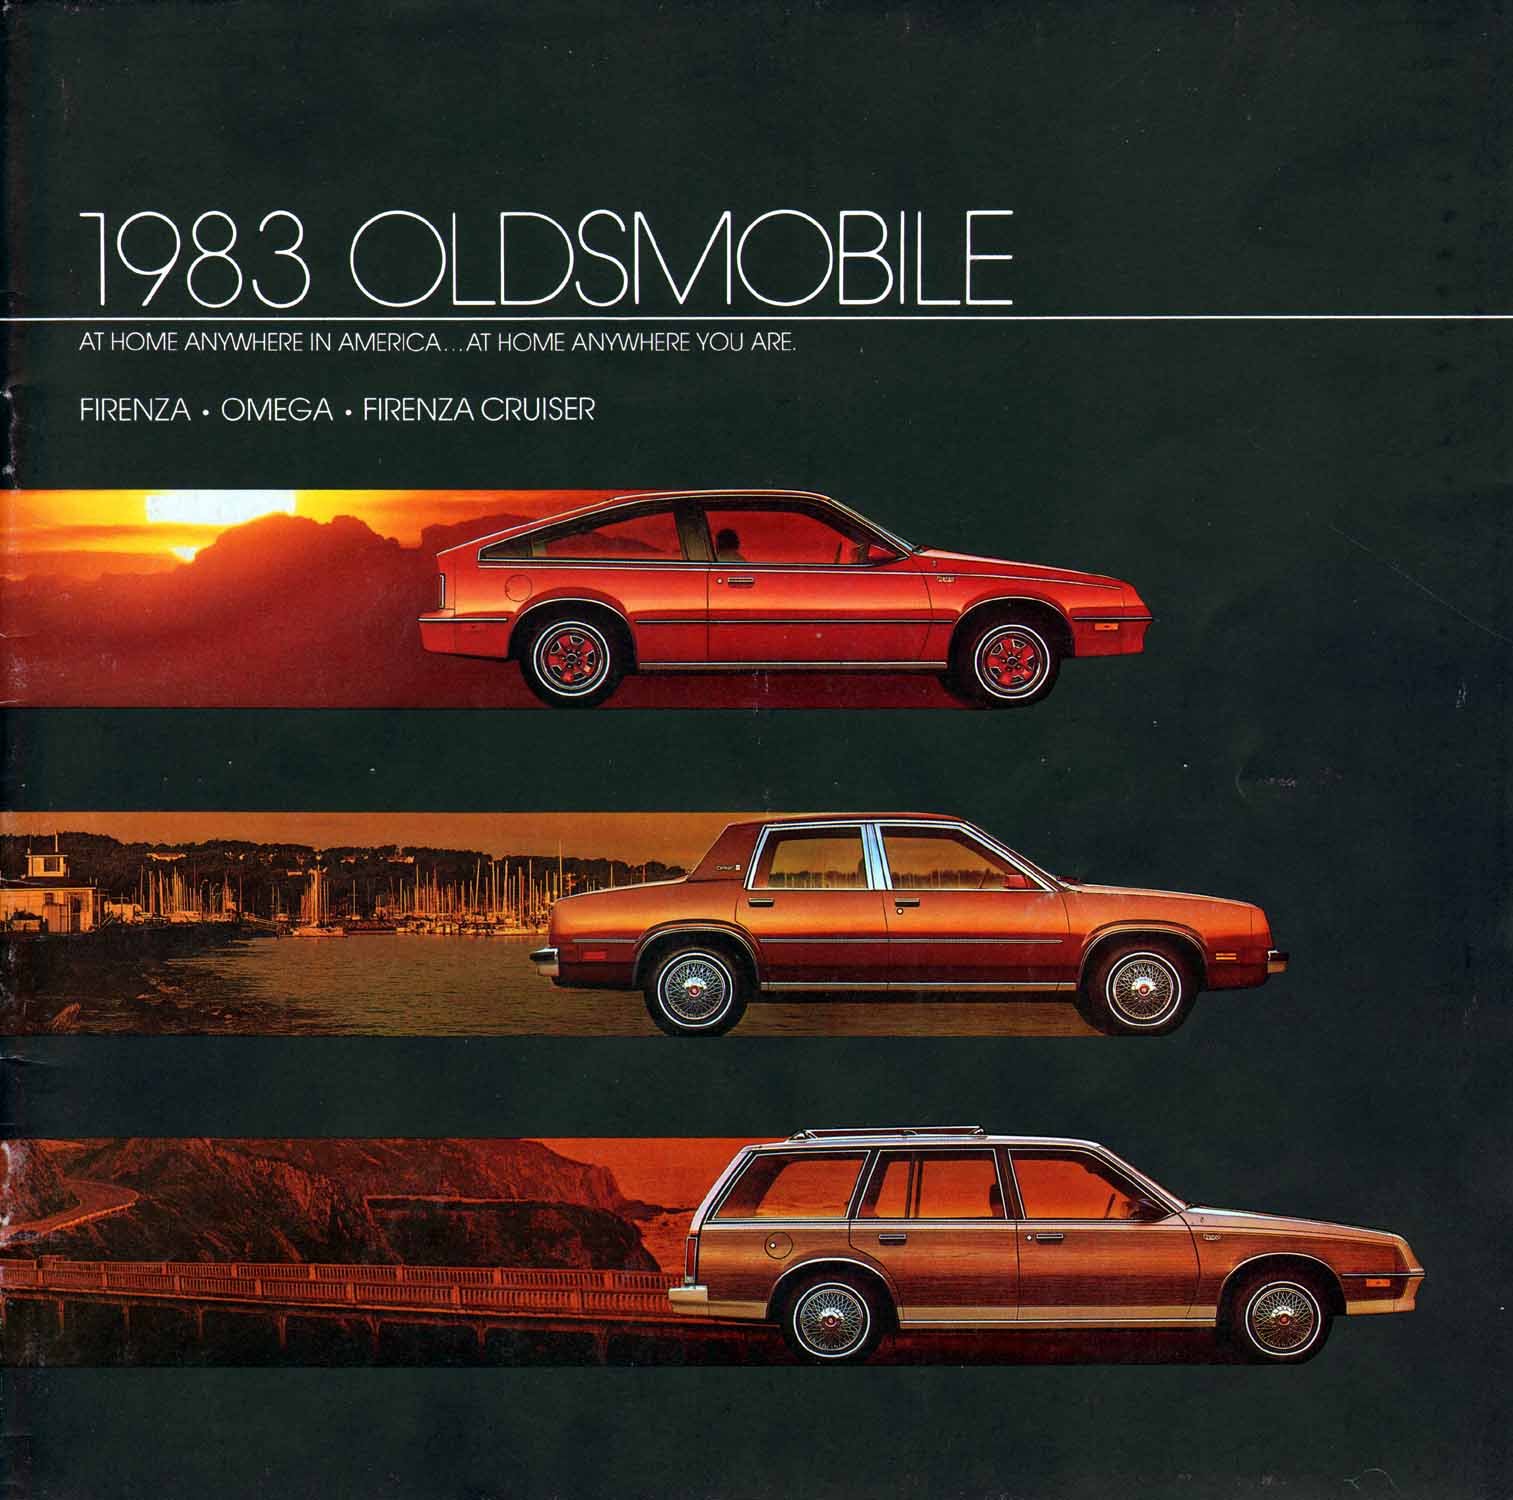 1983_Oldsmobile_Small_Size-01